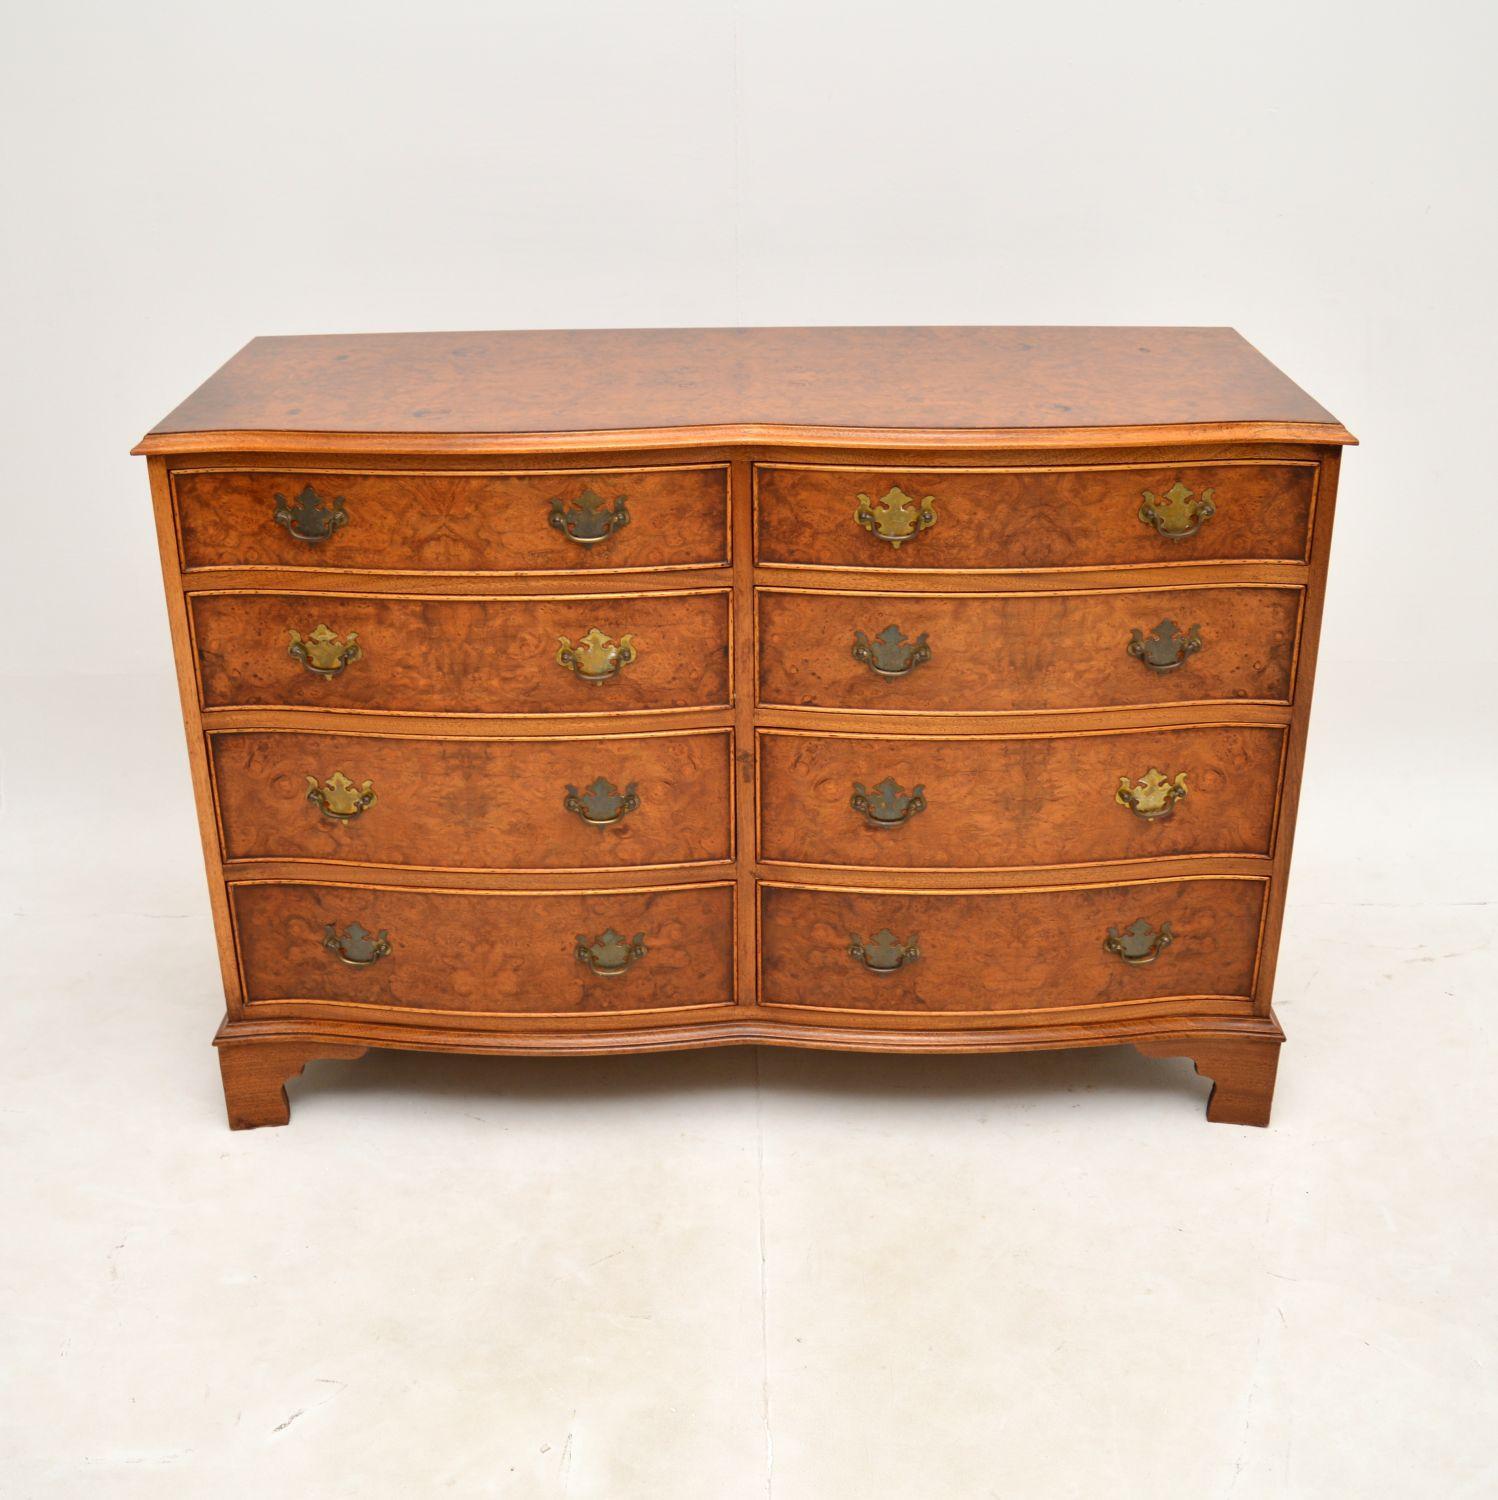 A beautiful and extremely well made antique Georgian style burr walnut chest of drawers / sideboard. This was made in England, it dates from around the 1930’s.

It is of superb quality, with fantastic design. There are two banks of bow fronted